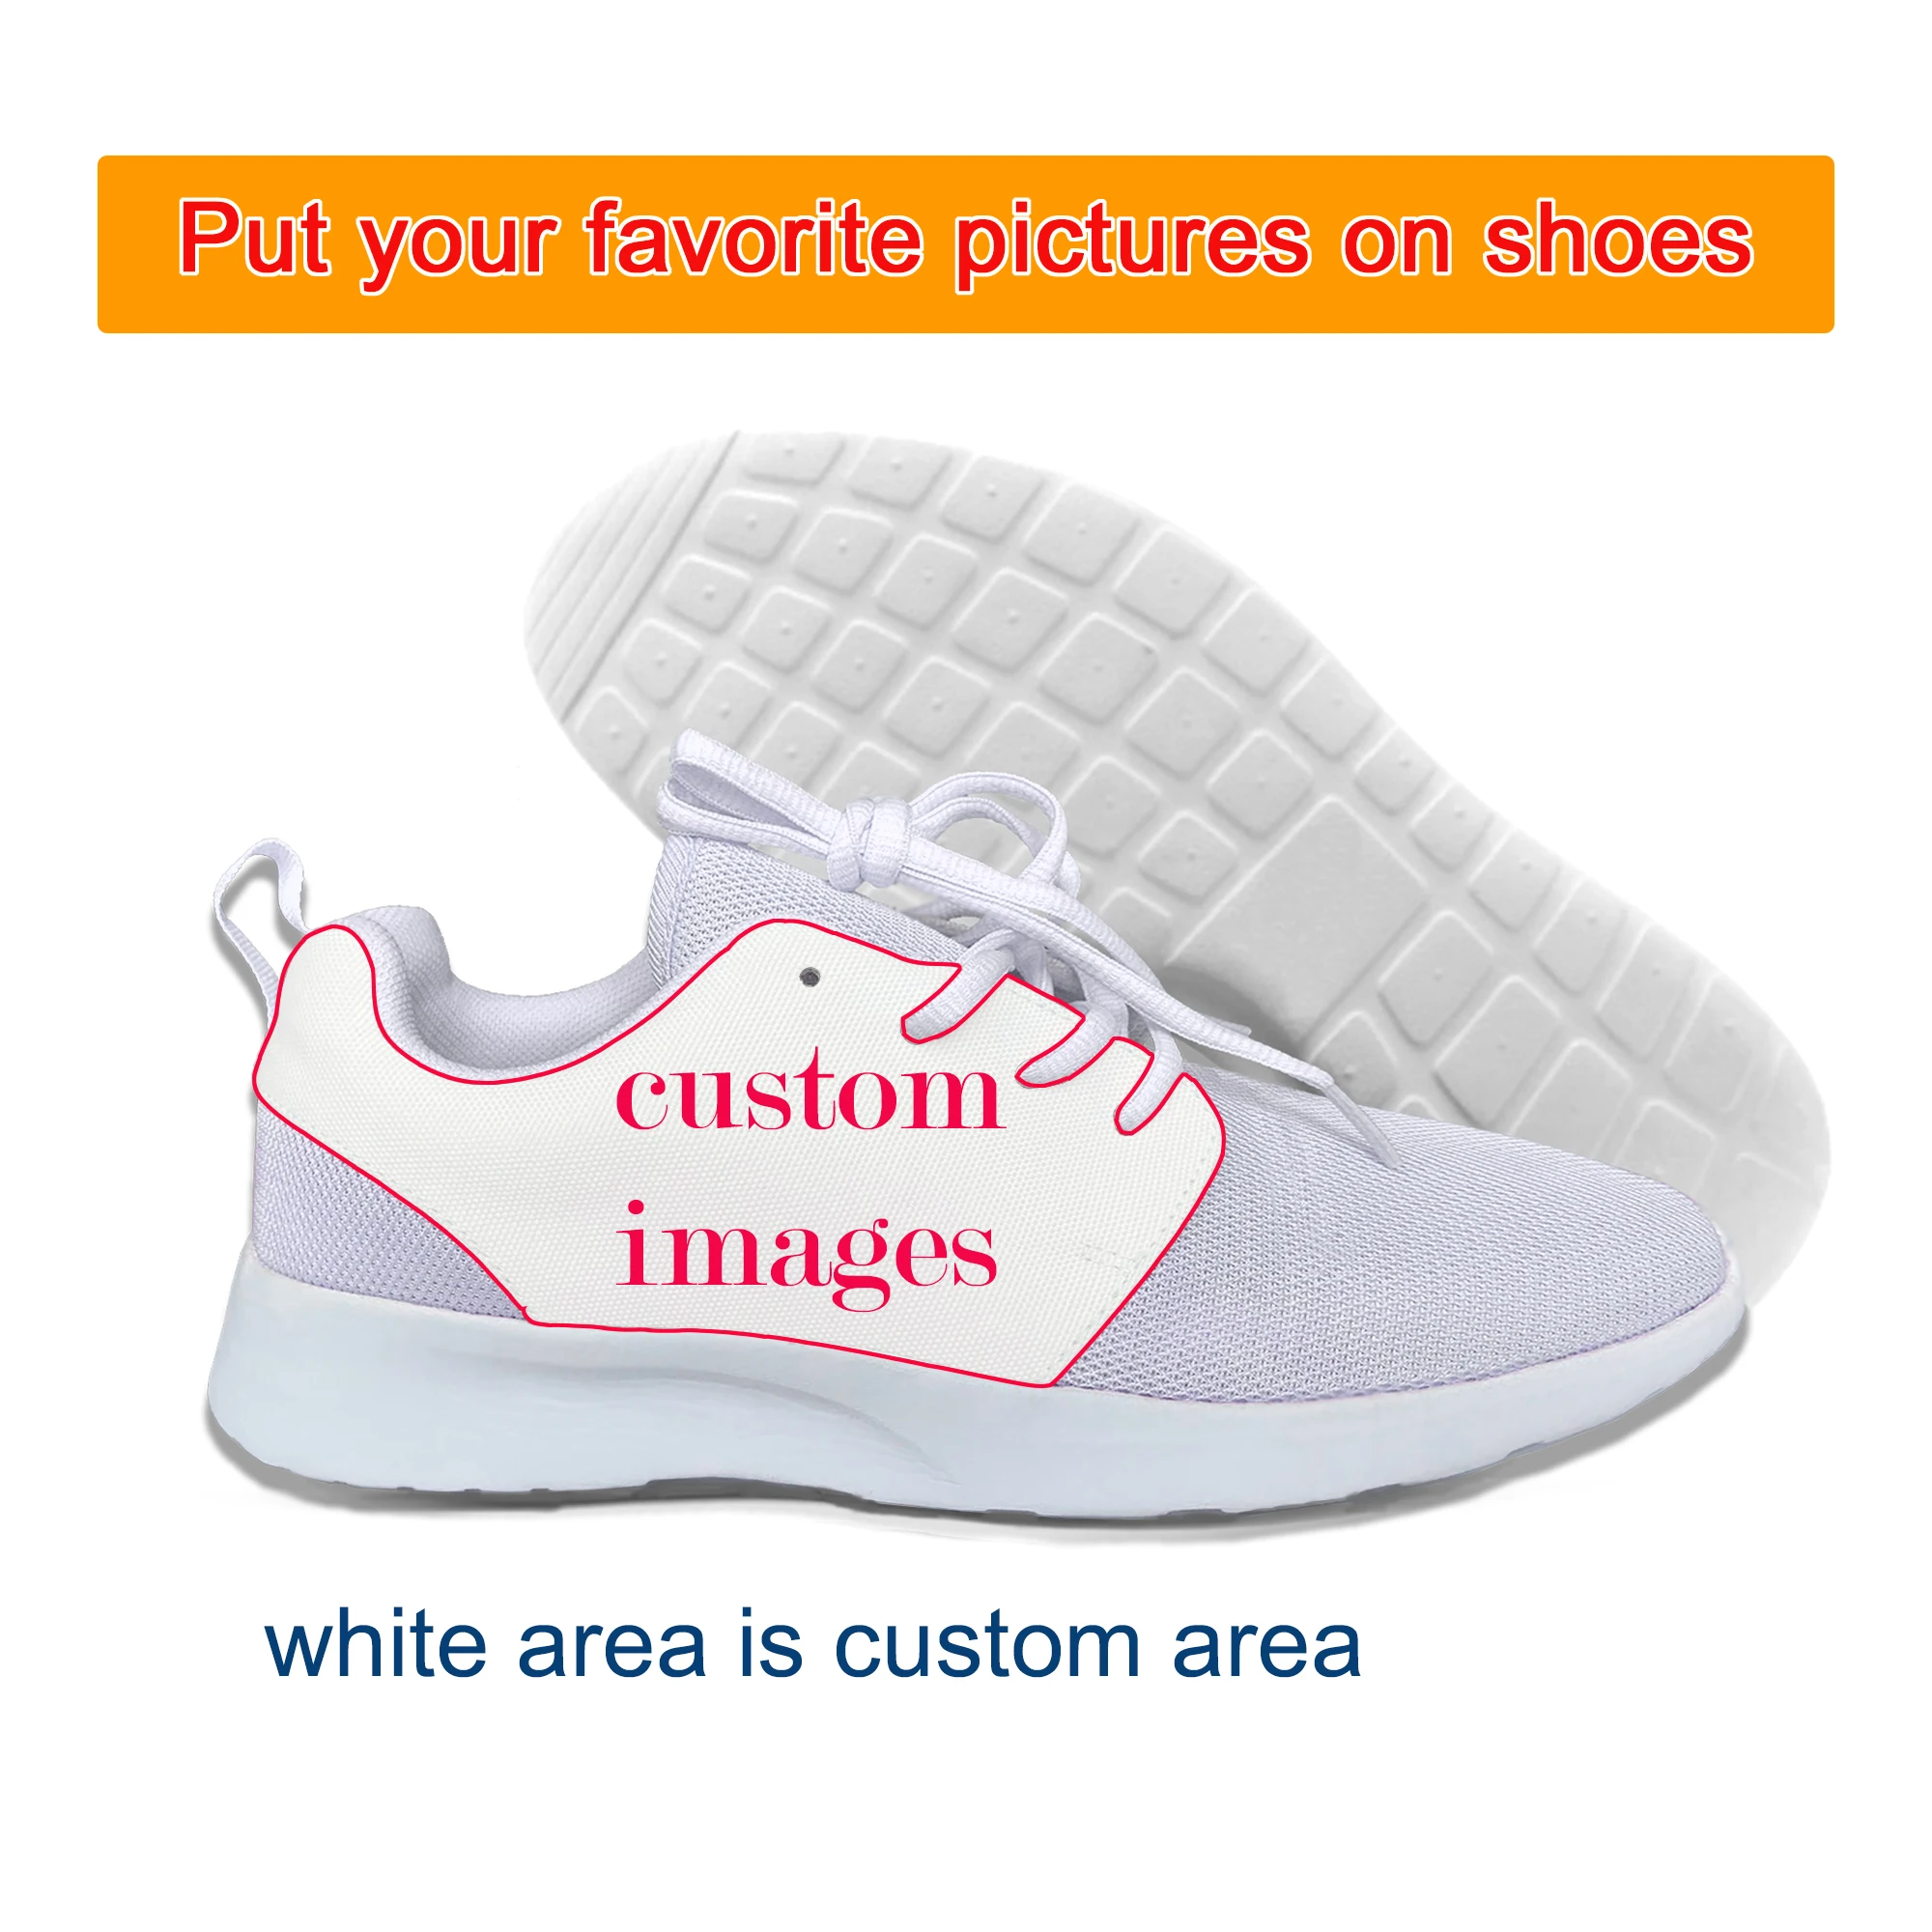 

Classic Mesh Low Top Shoes Flats 2019 3D Print The Raiders Image Lacing Casual Sneakers for Oakland Football Fans